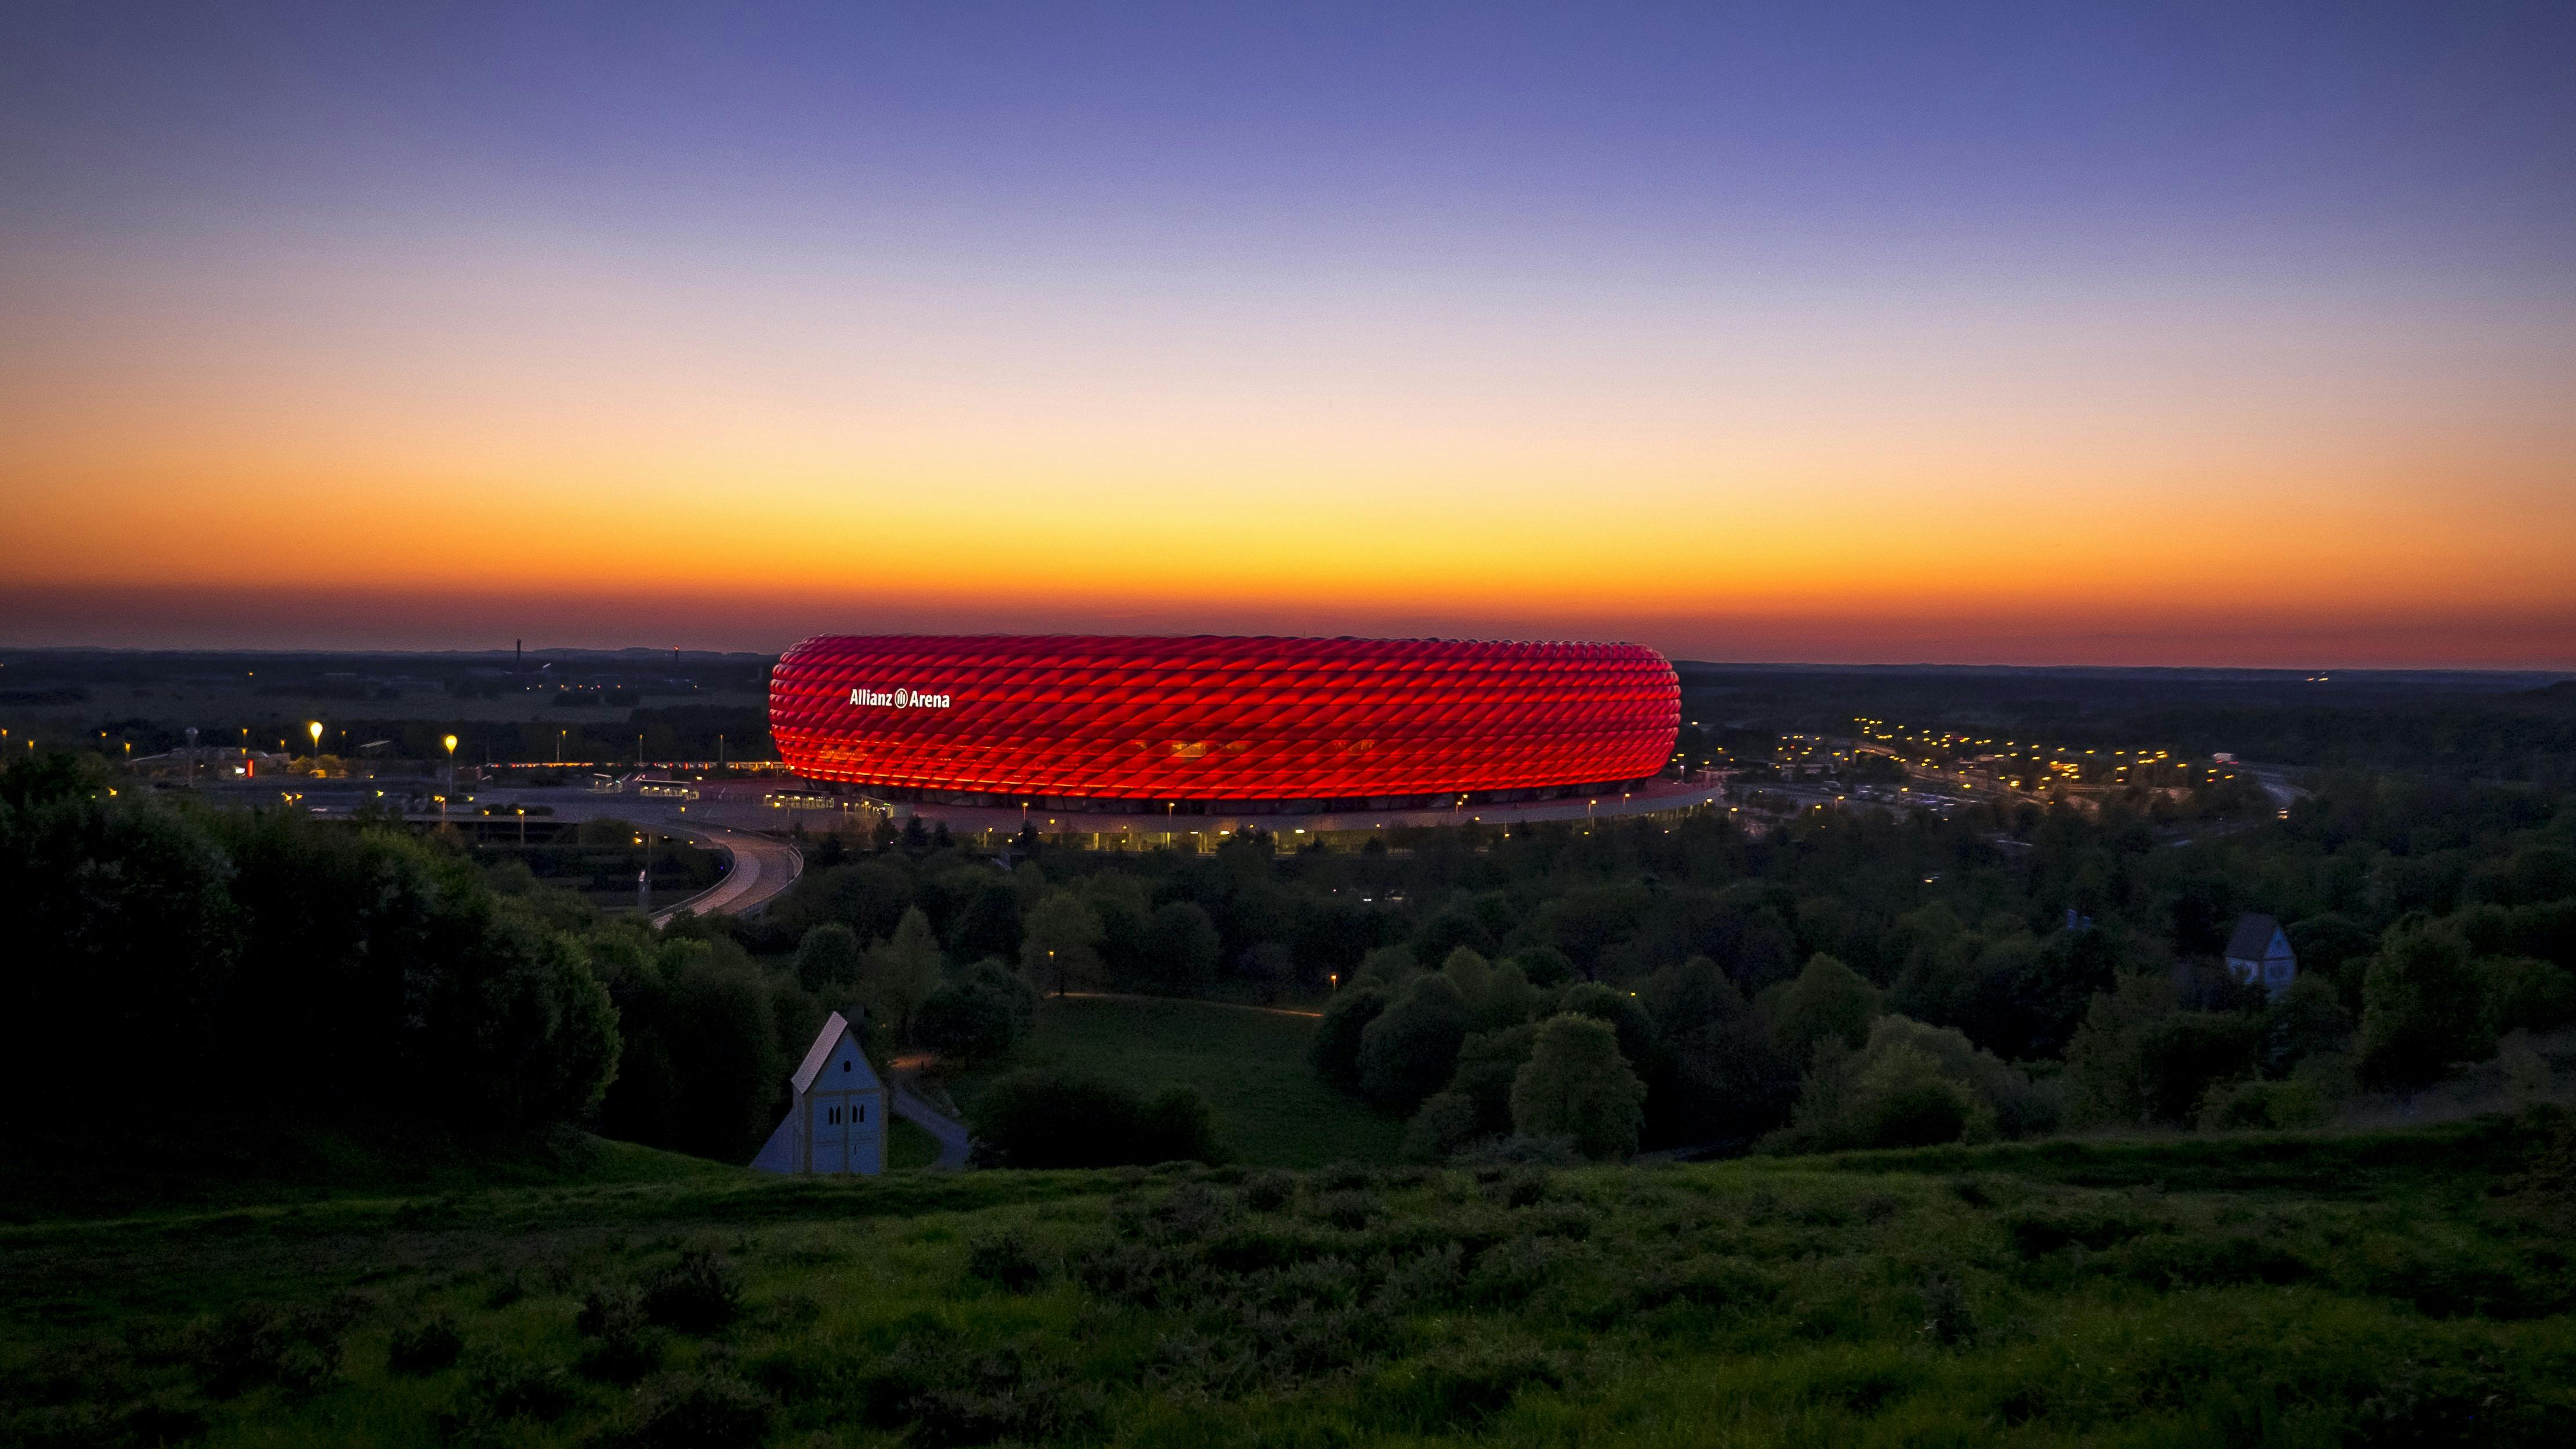 Munich city tour with self-guided visit of the FC Bayern stadium Musement